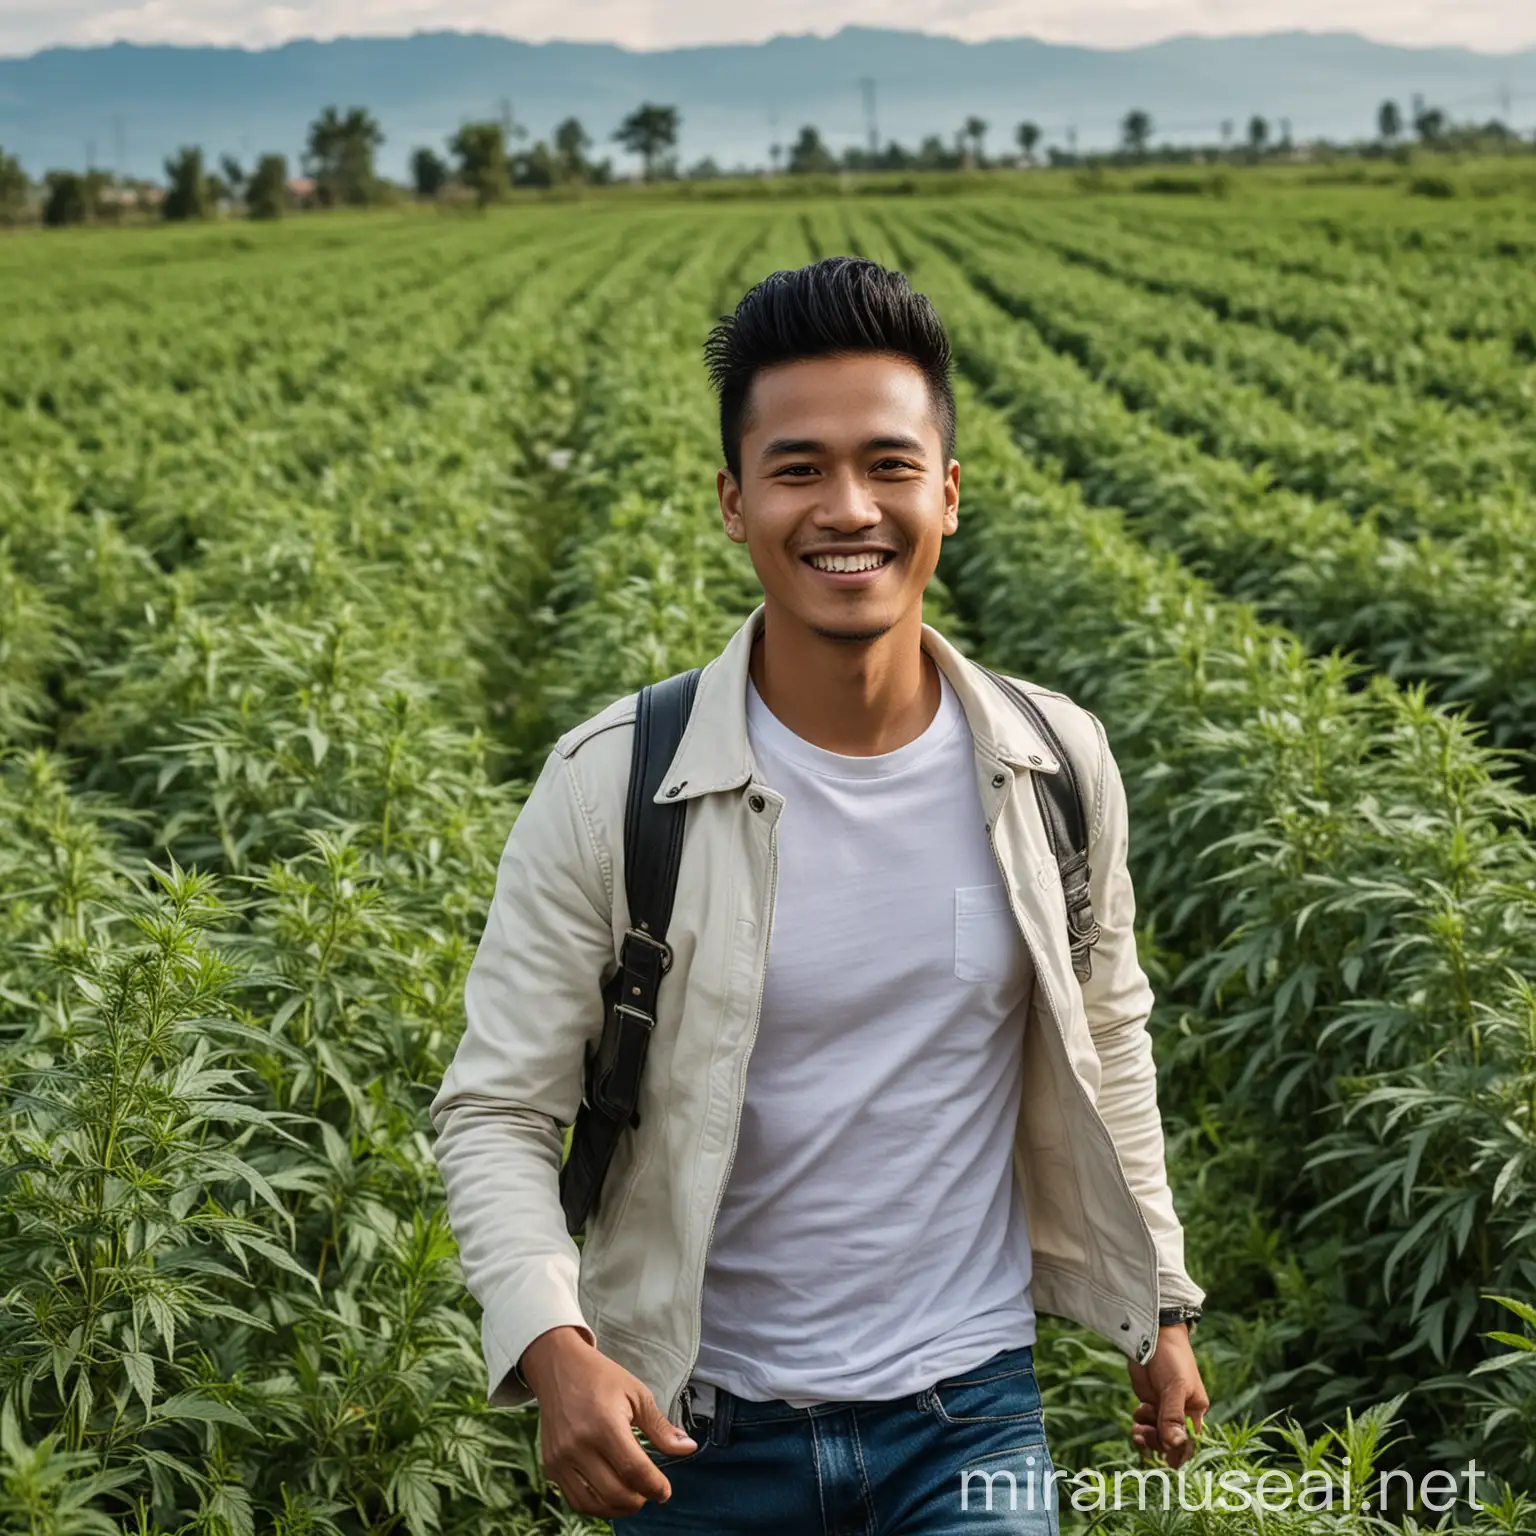 A 30-year-old Indonesian man, smiling with neatly combed hair wearing a white shirt paired with a leather jacket, blue jeans, sneakers, casually walking in a green marijuana field, under the bright blue sky